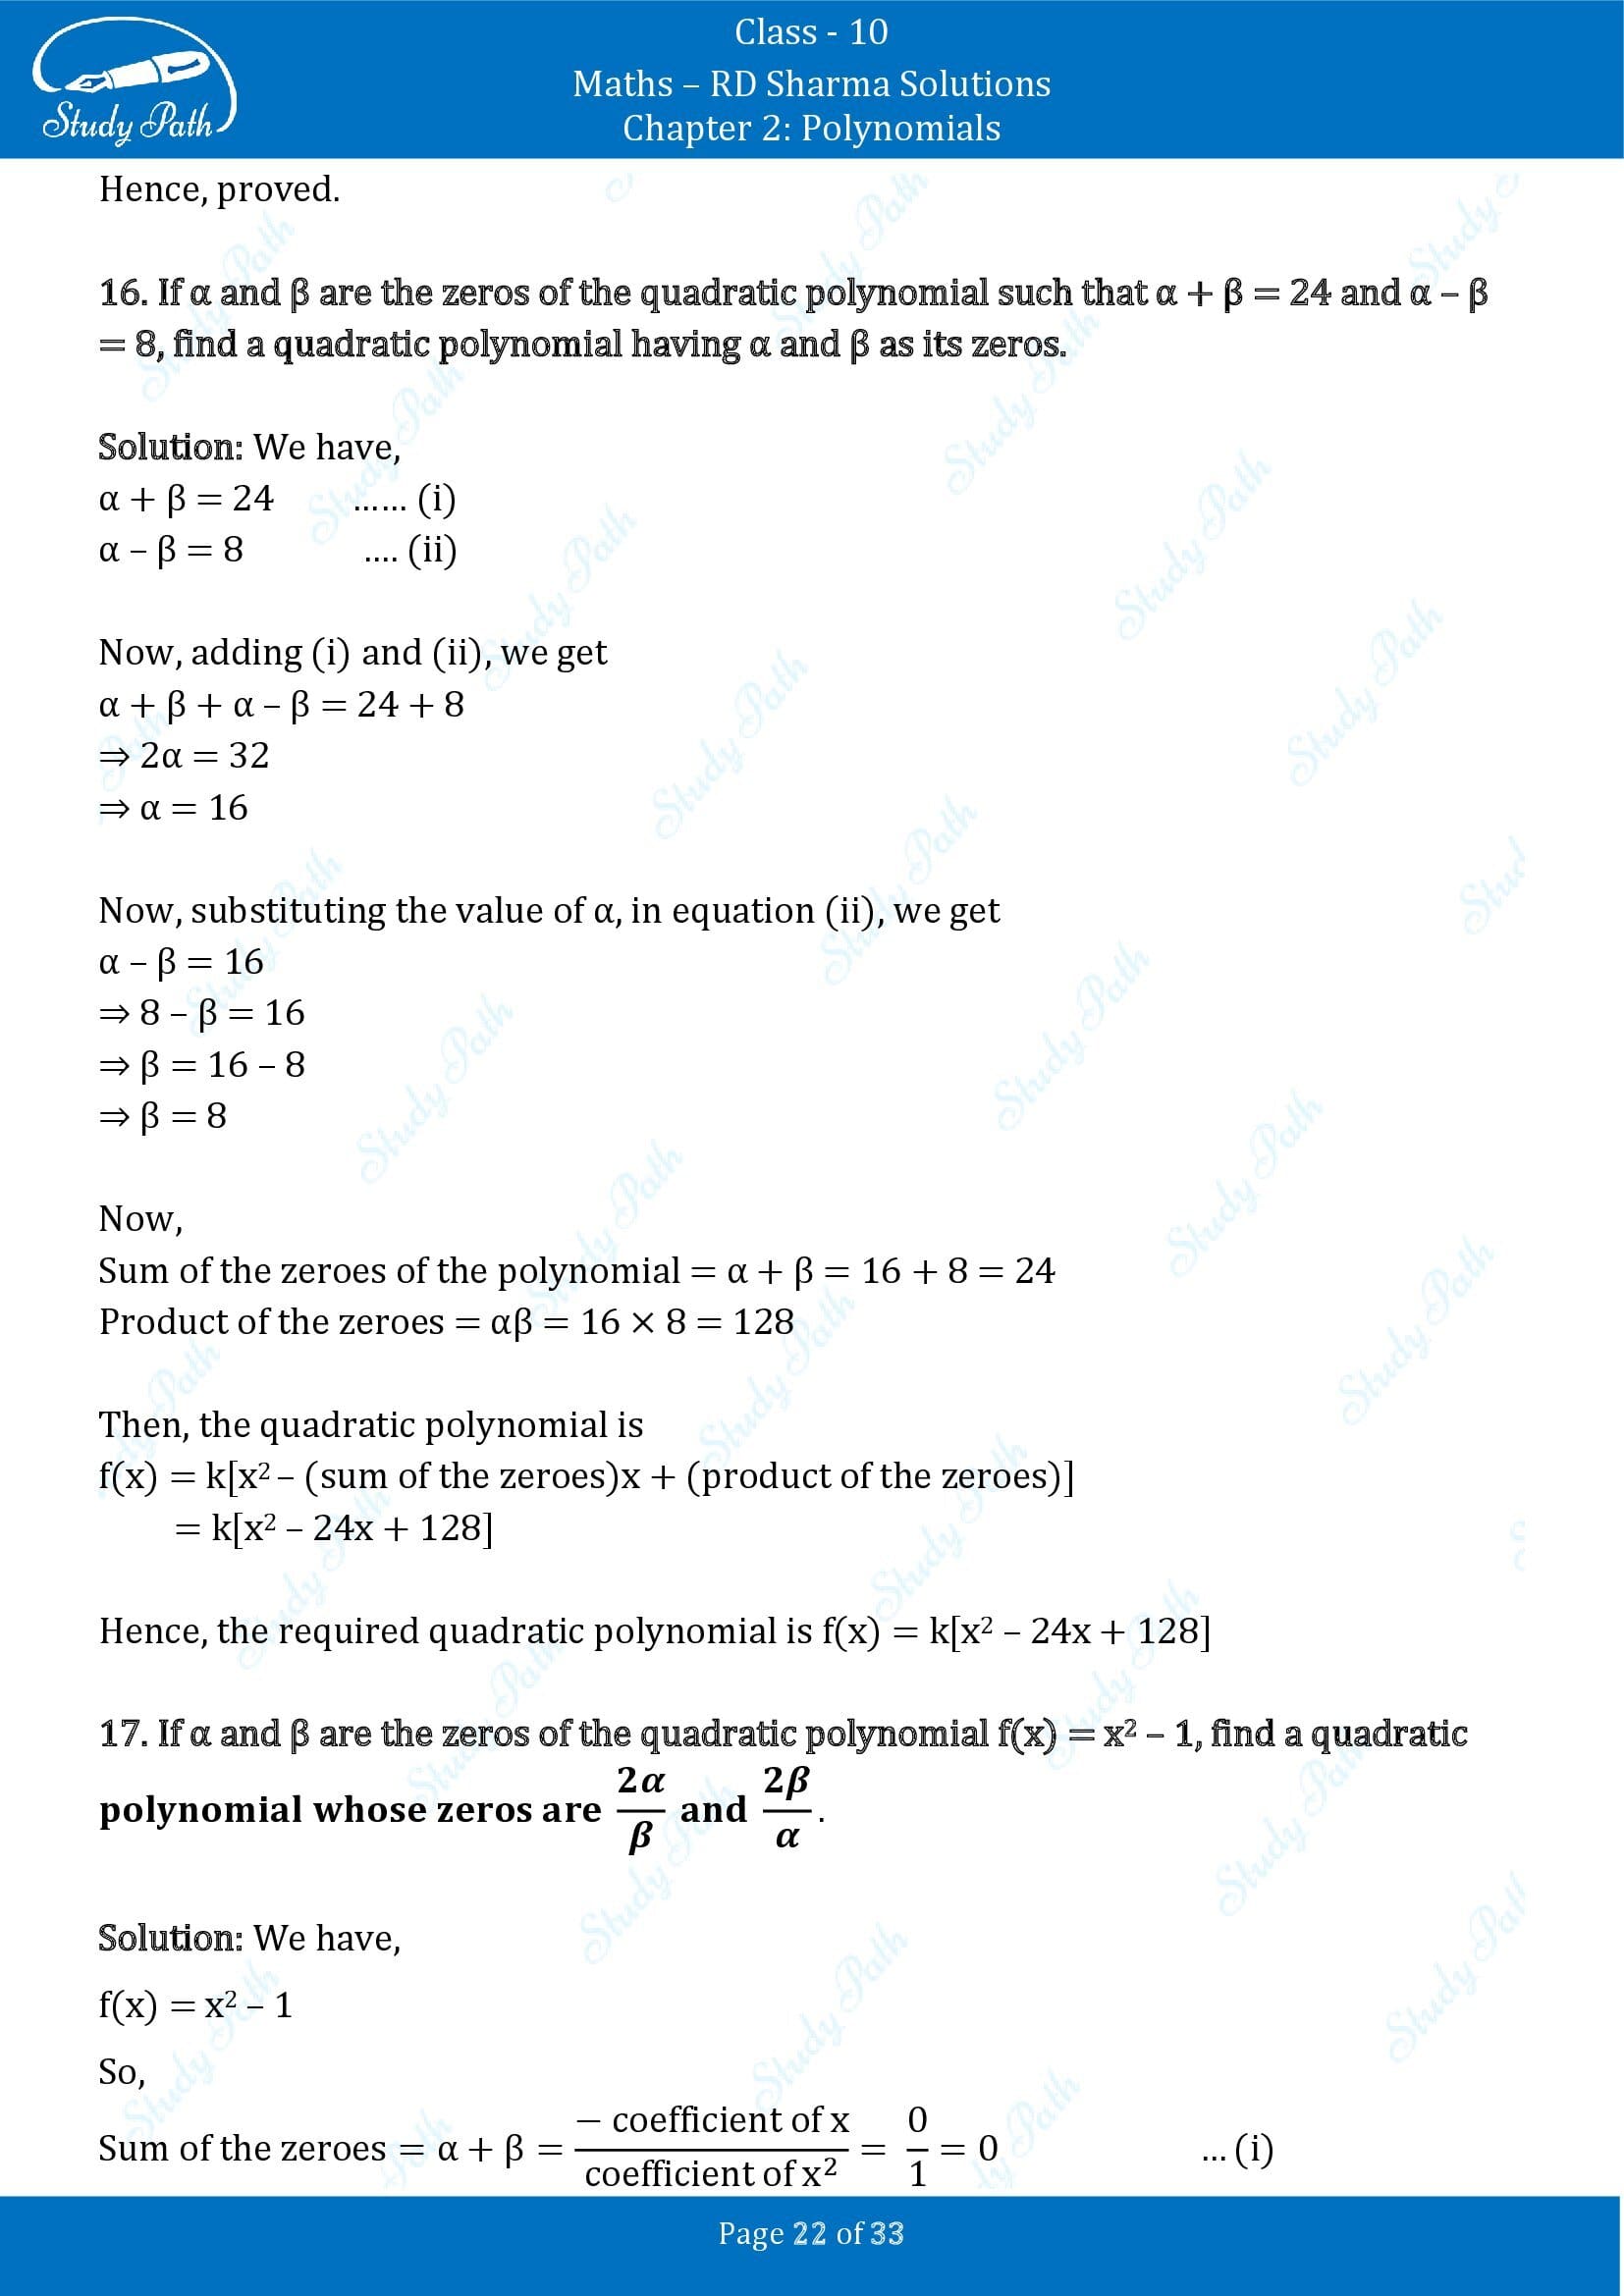 RD Sharma Solutions Class 10 Chapter 2 Polynomials Exercise 2.1 00022